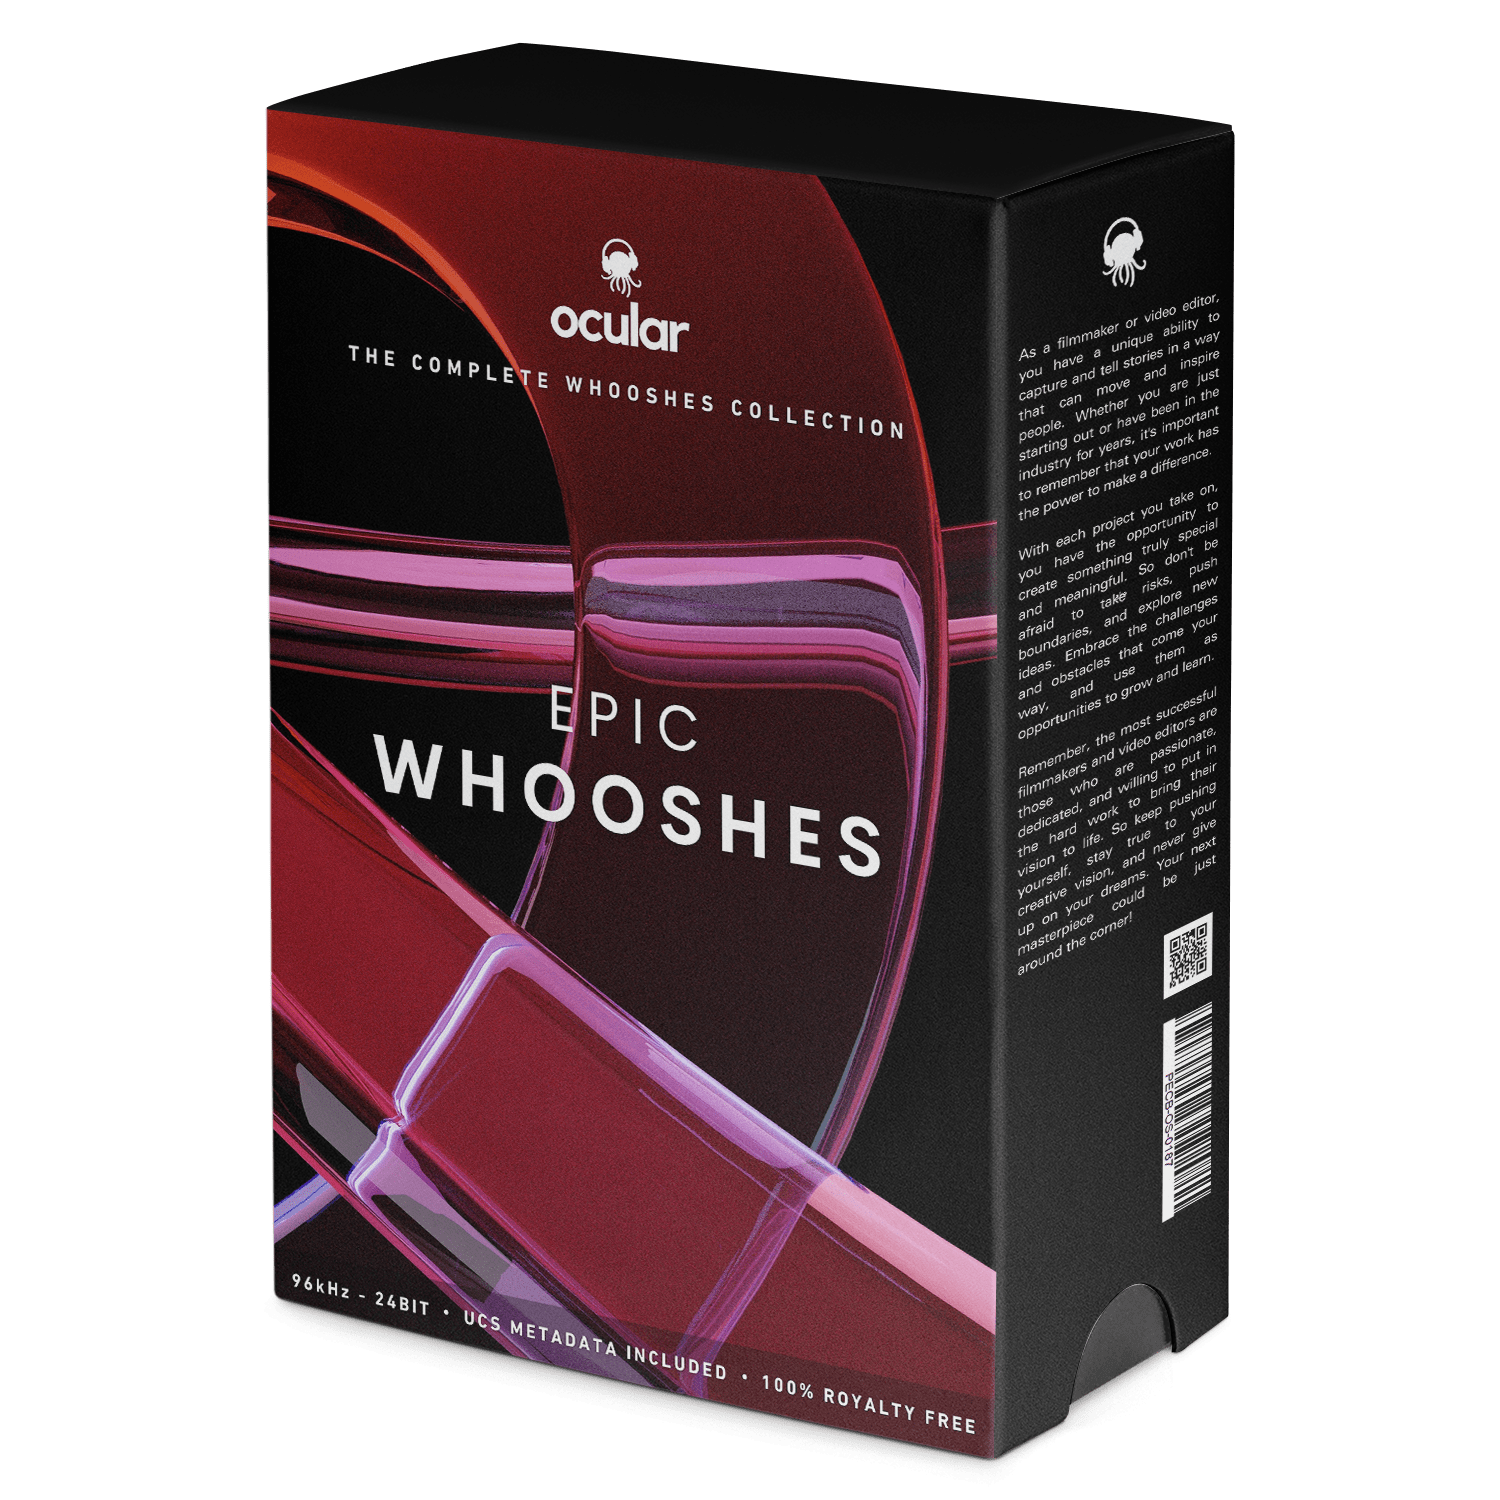 Epic Whooshes Sound Effects for Video Editing. Professional Sound FX Library.